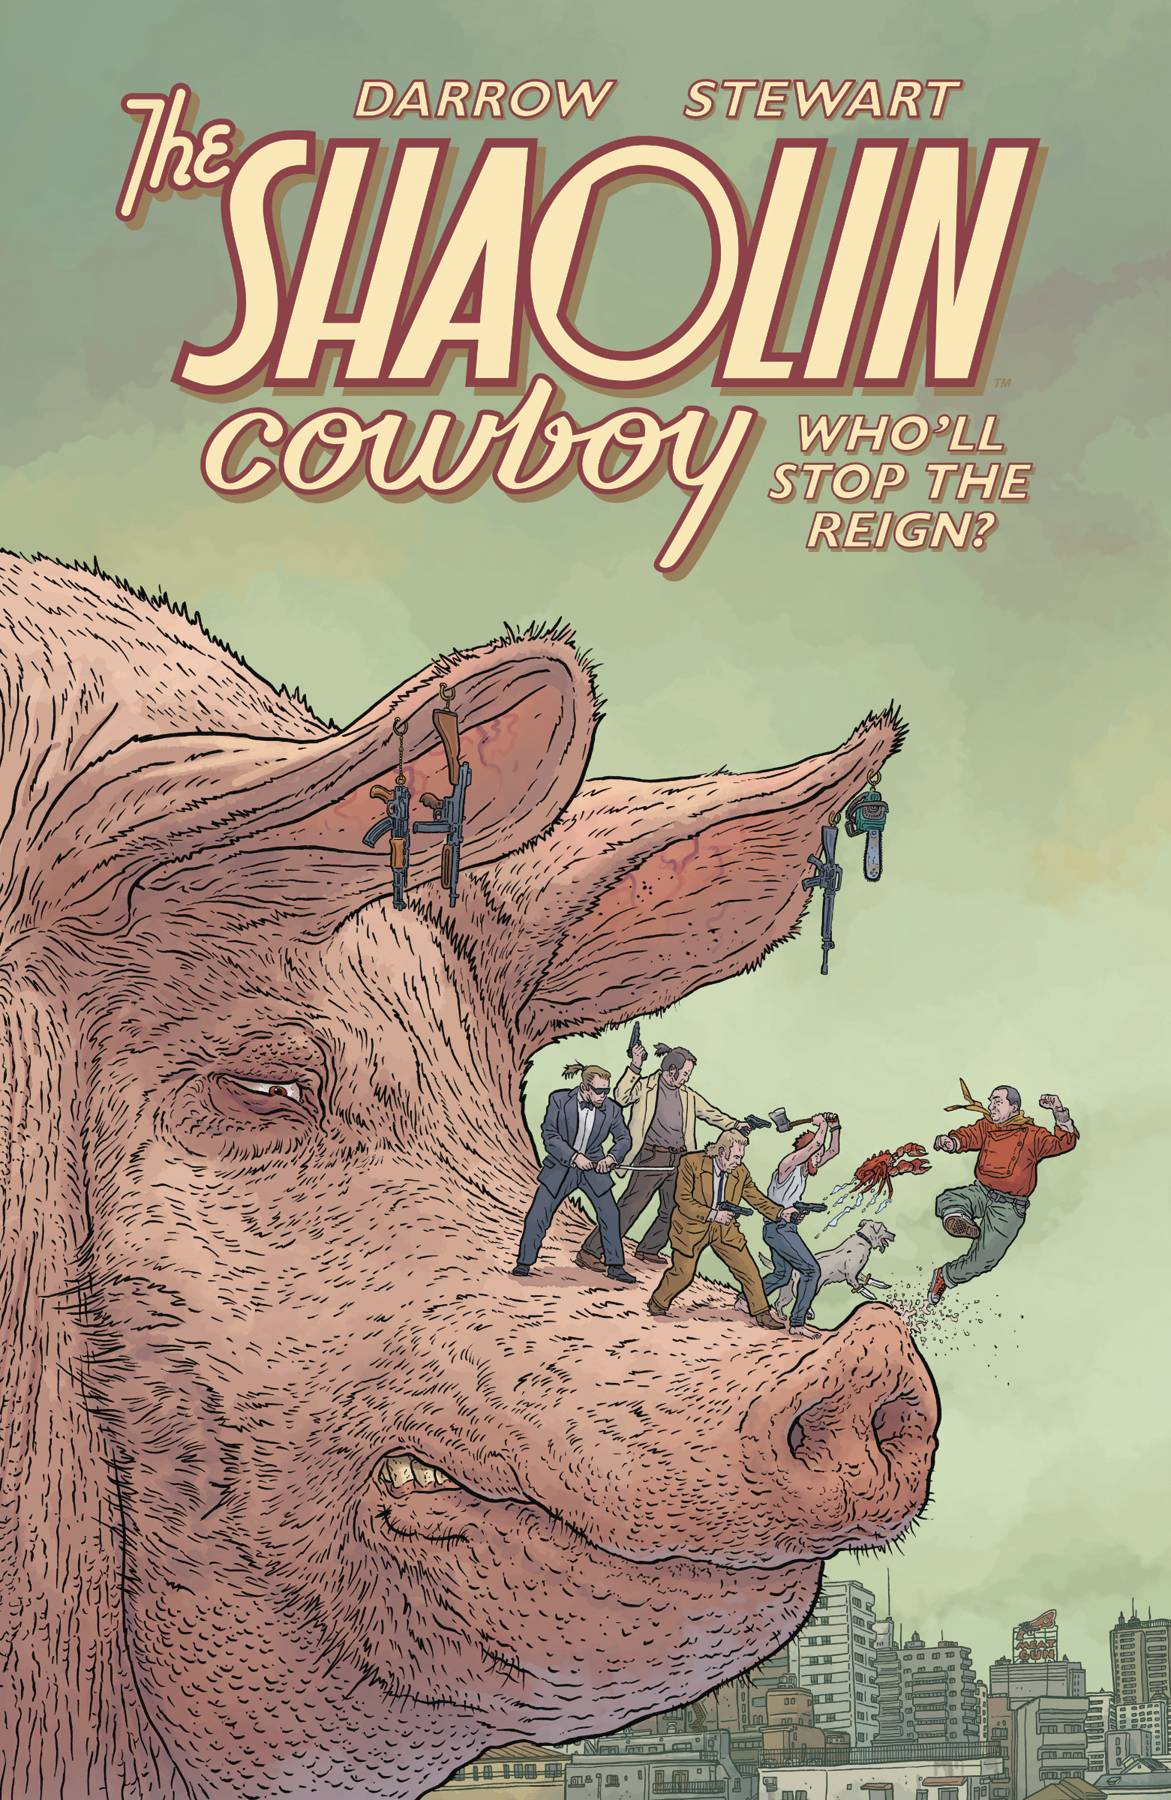 Shaolin Cowboy Who'll Stop The Reign